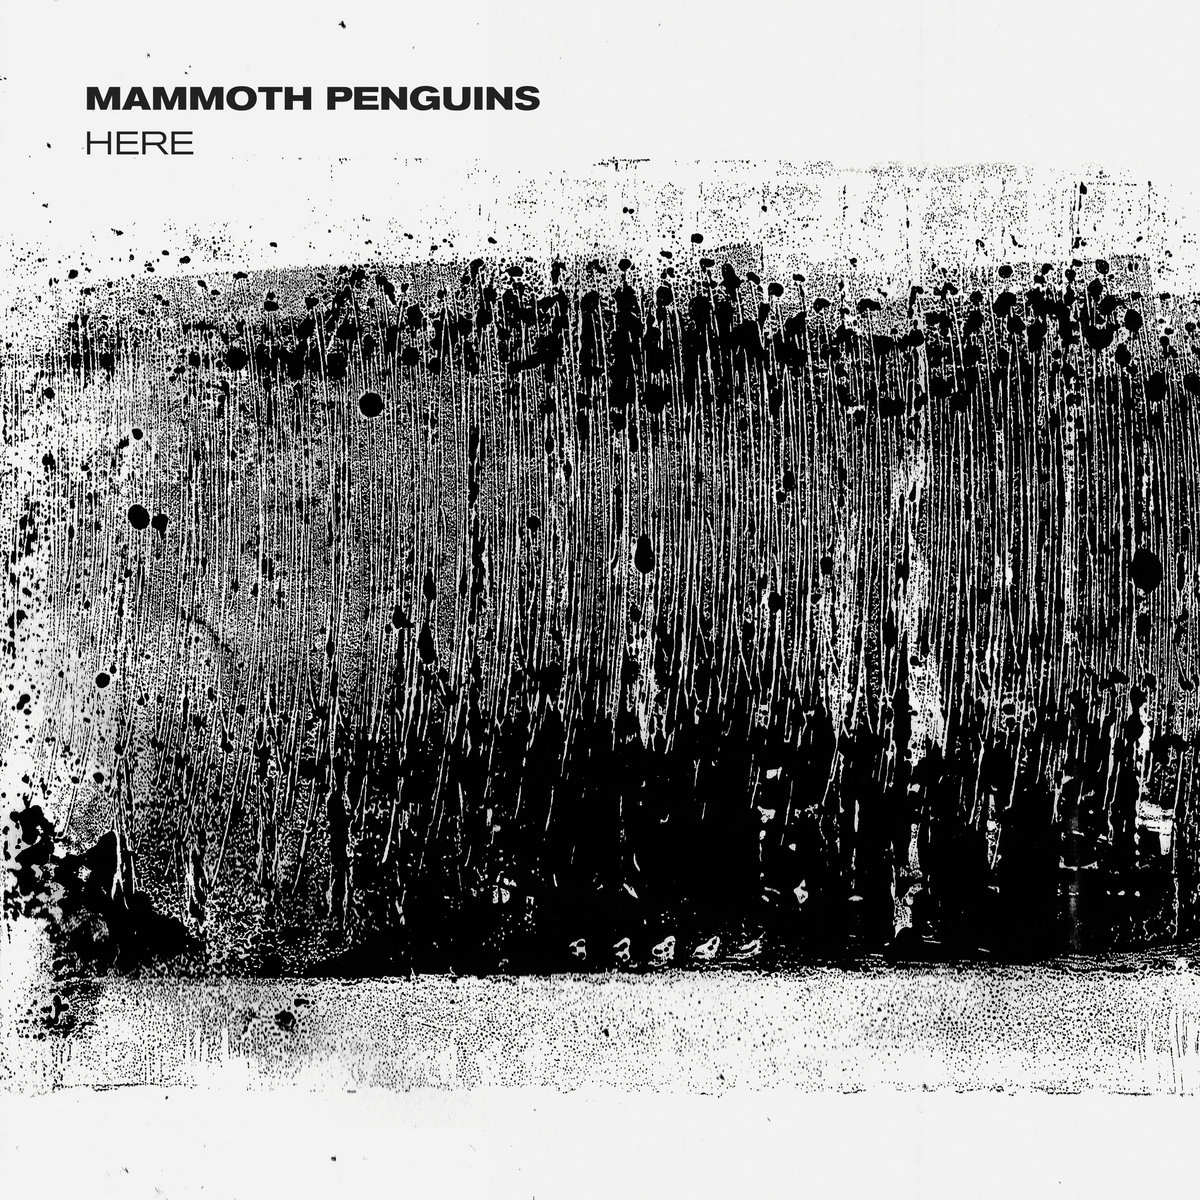 MAMMOTH PENGUINS – HERE